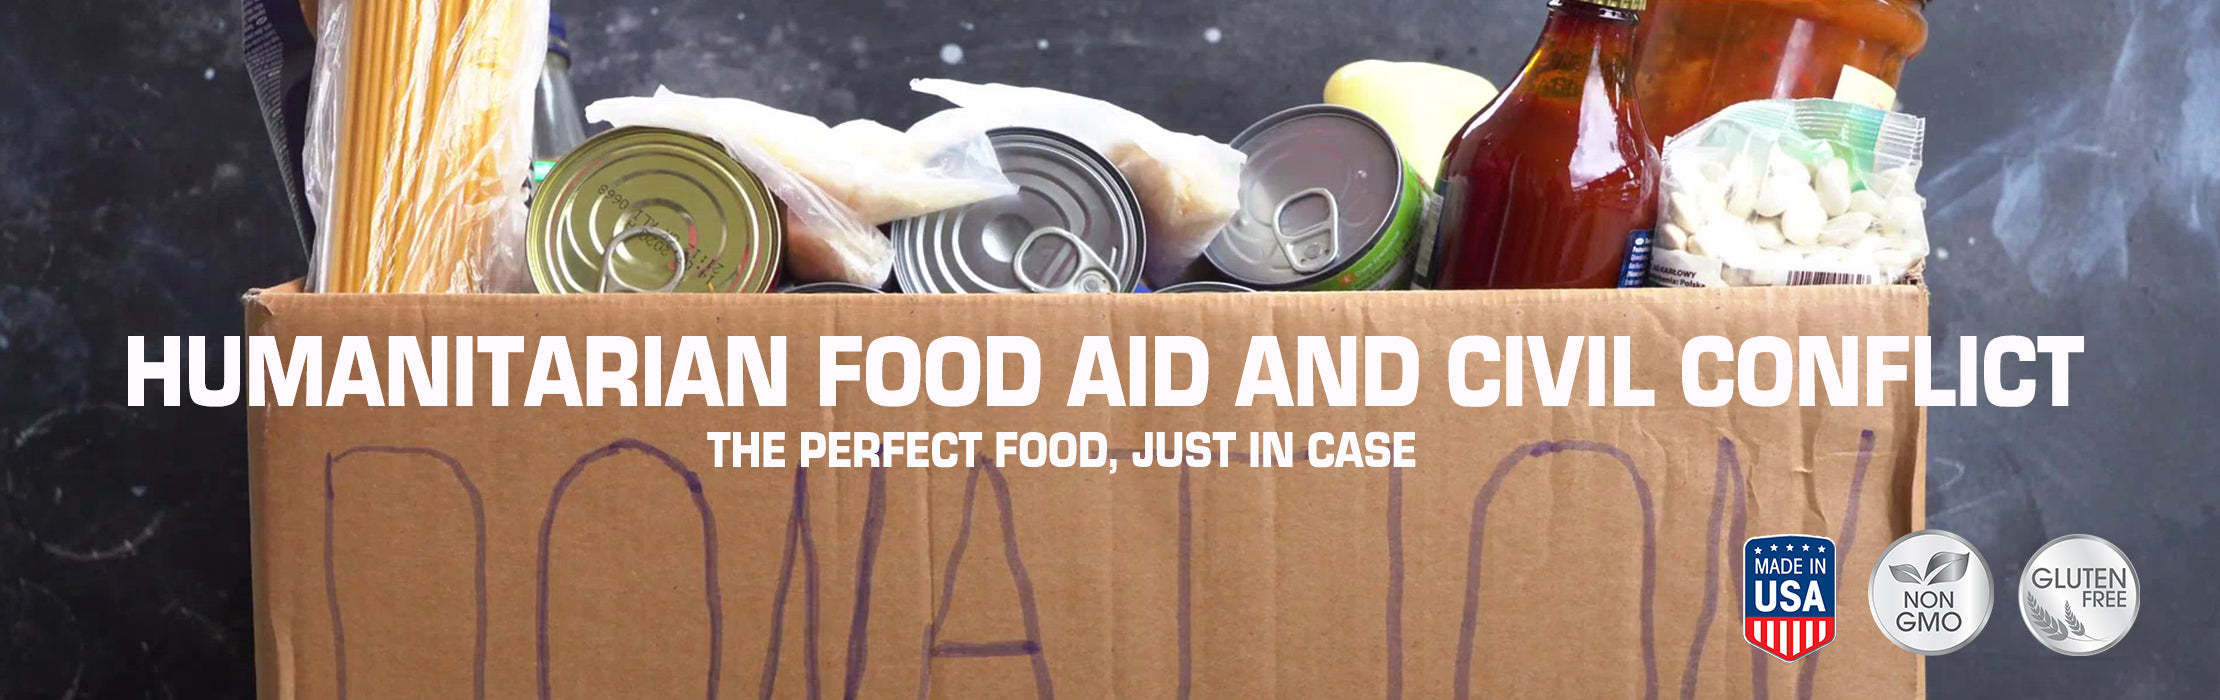 Humanitarian Food Aid and Civil Conflict